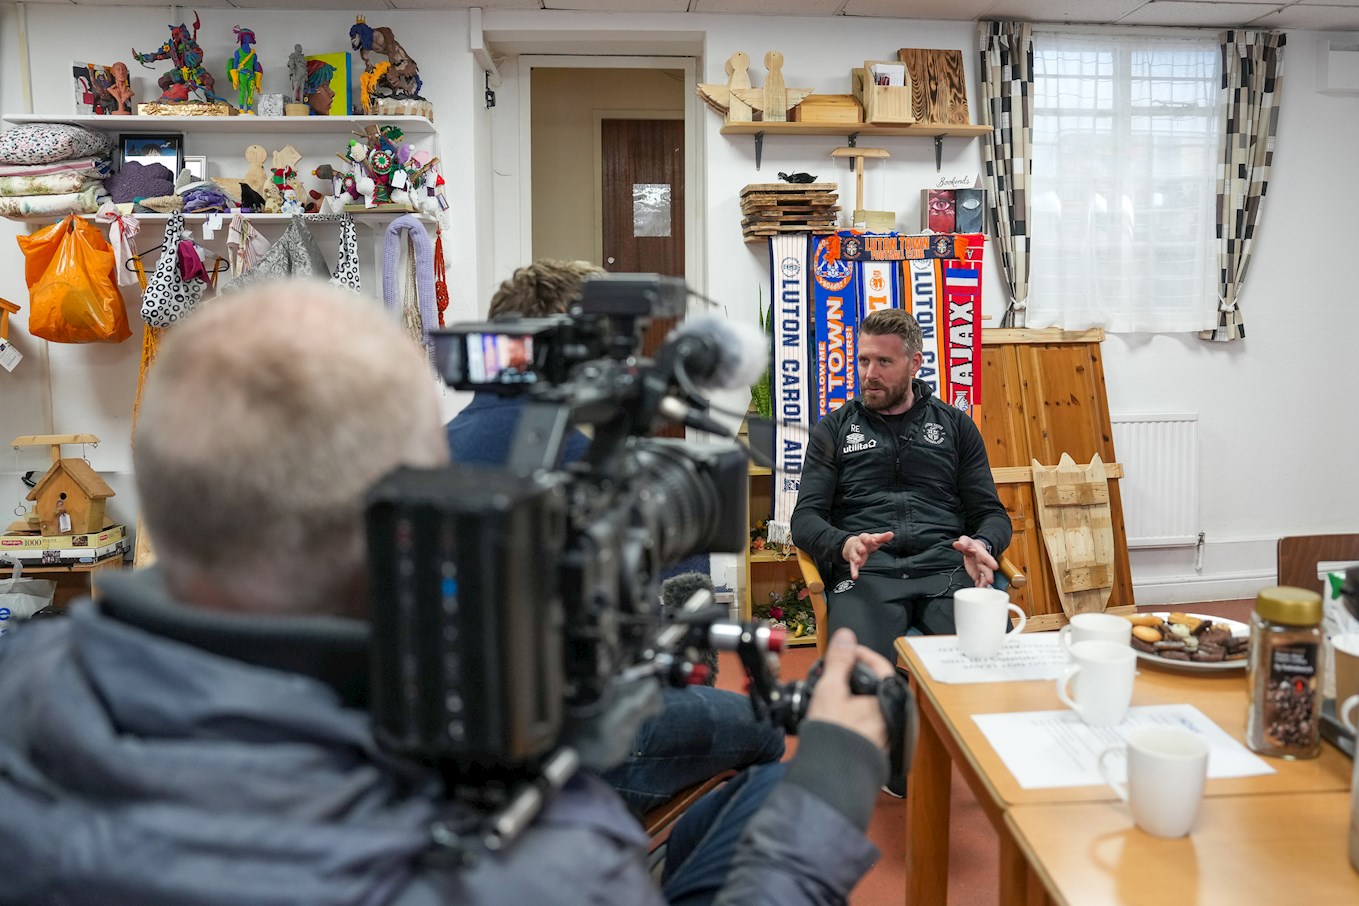 Rob Edwards is interviewed by BBC Look East while visiting NOAH